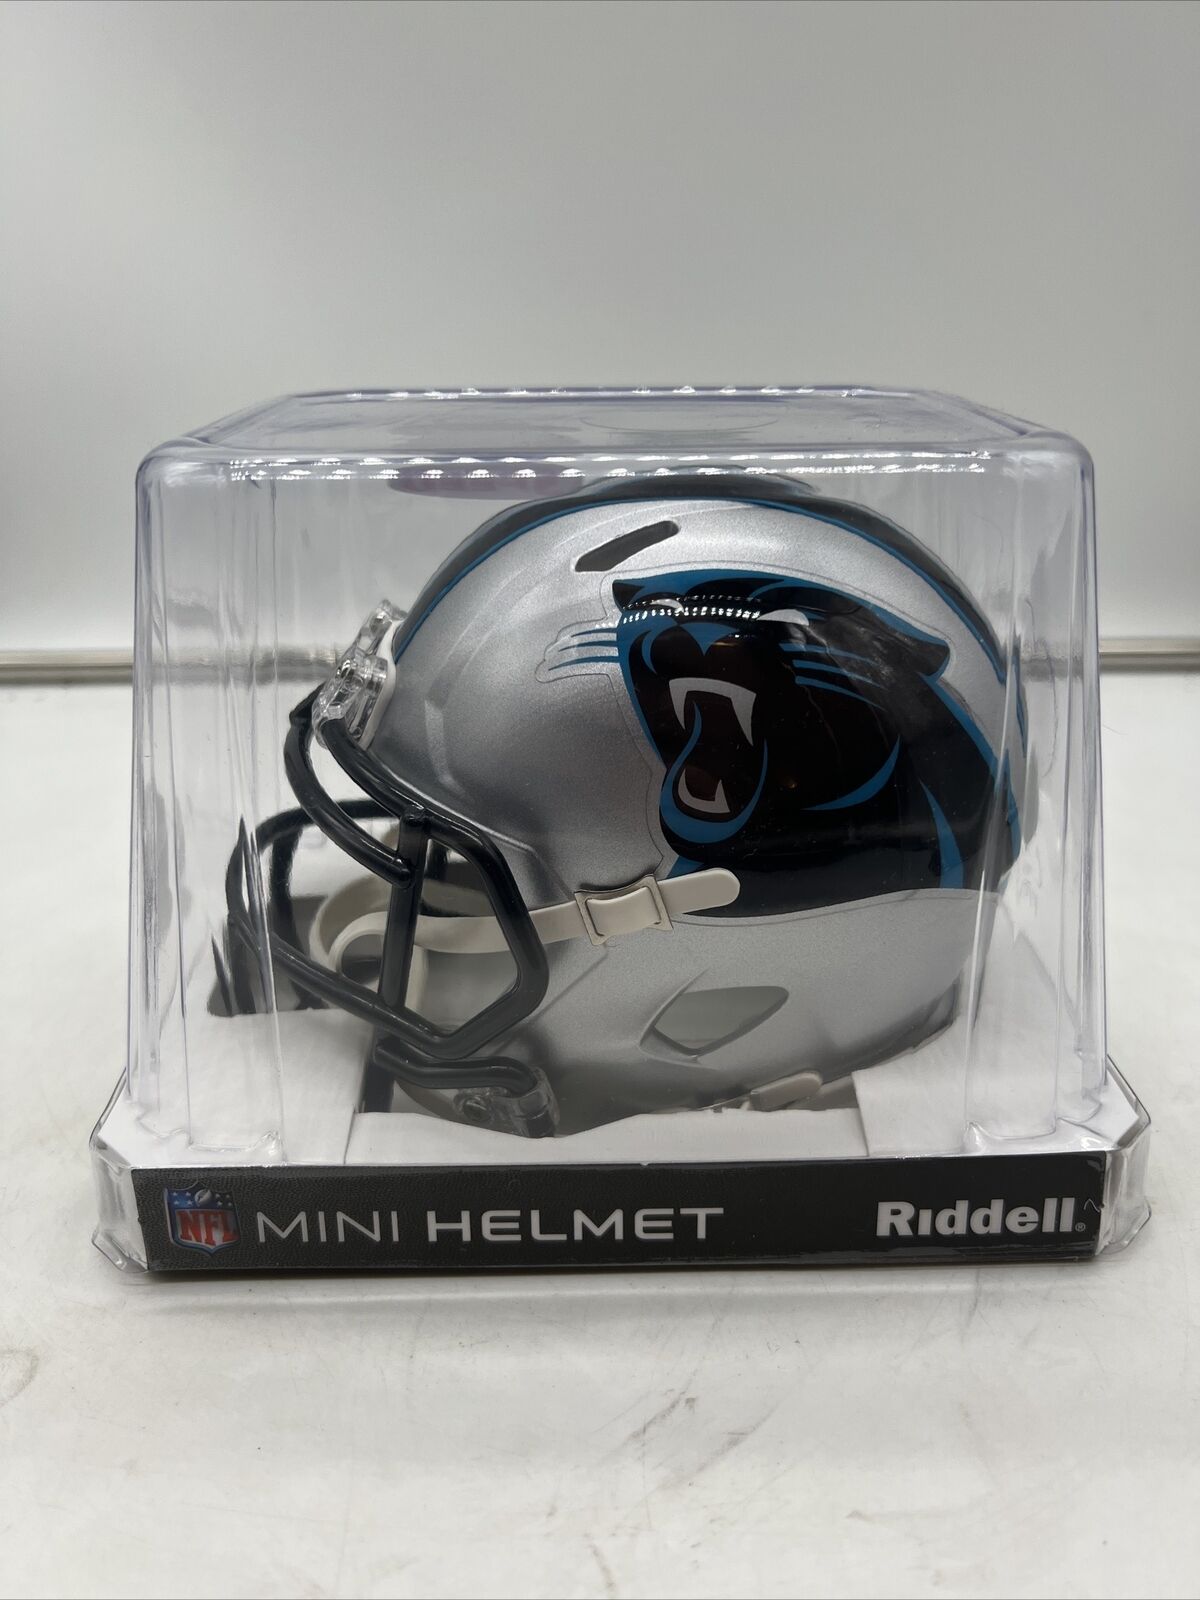 Carolina Panthers Speed Riddell Football Mini Helmet New in box NFL Collectible